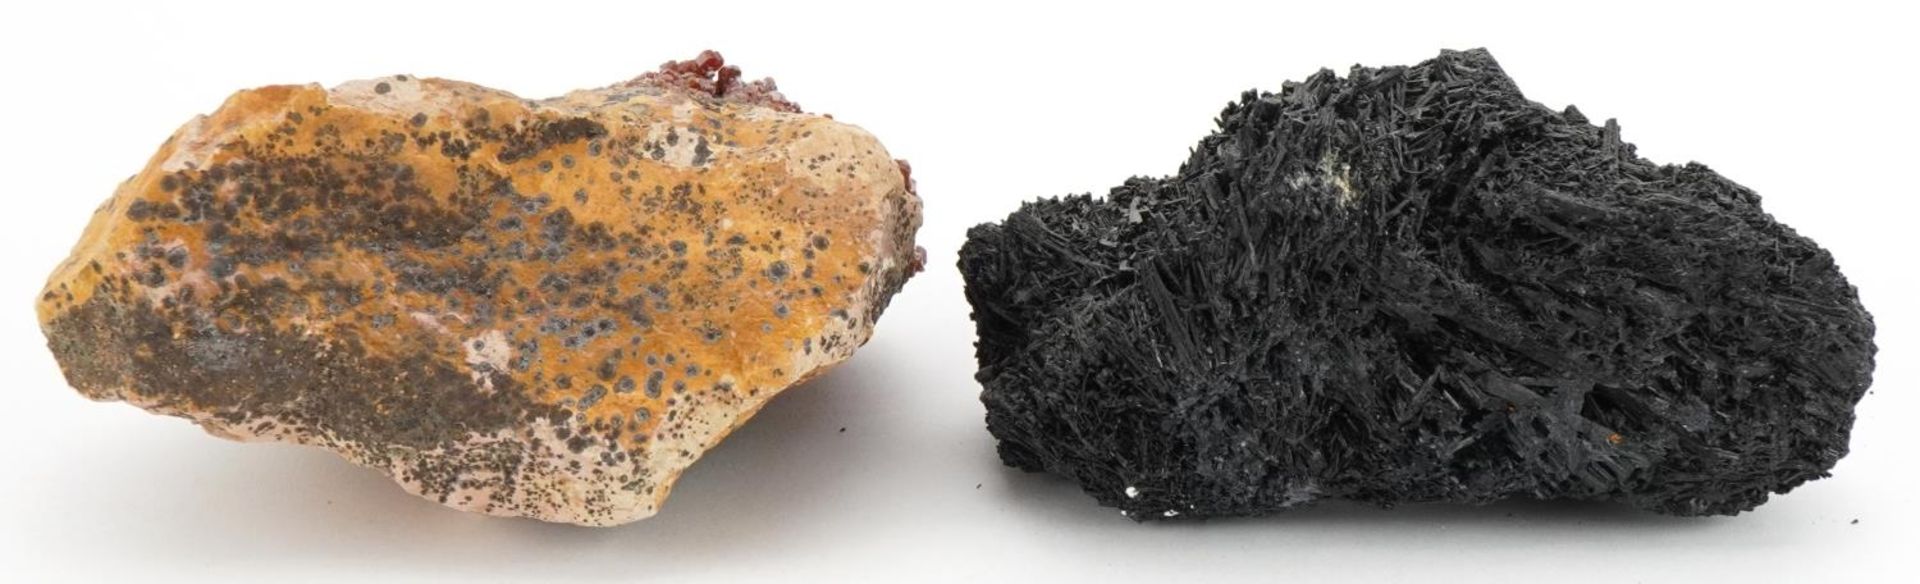 Two geology interest natural history specimens on stands comprising black tourmaline and vanadinite, - Image 4 of 4